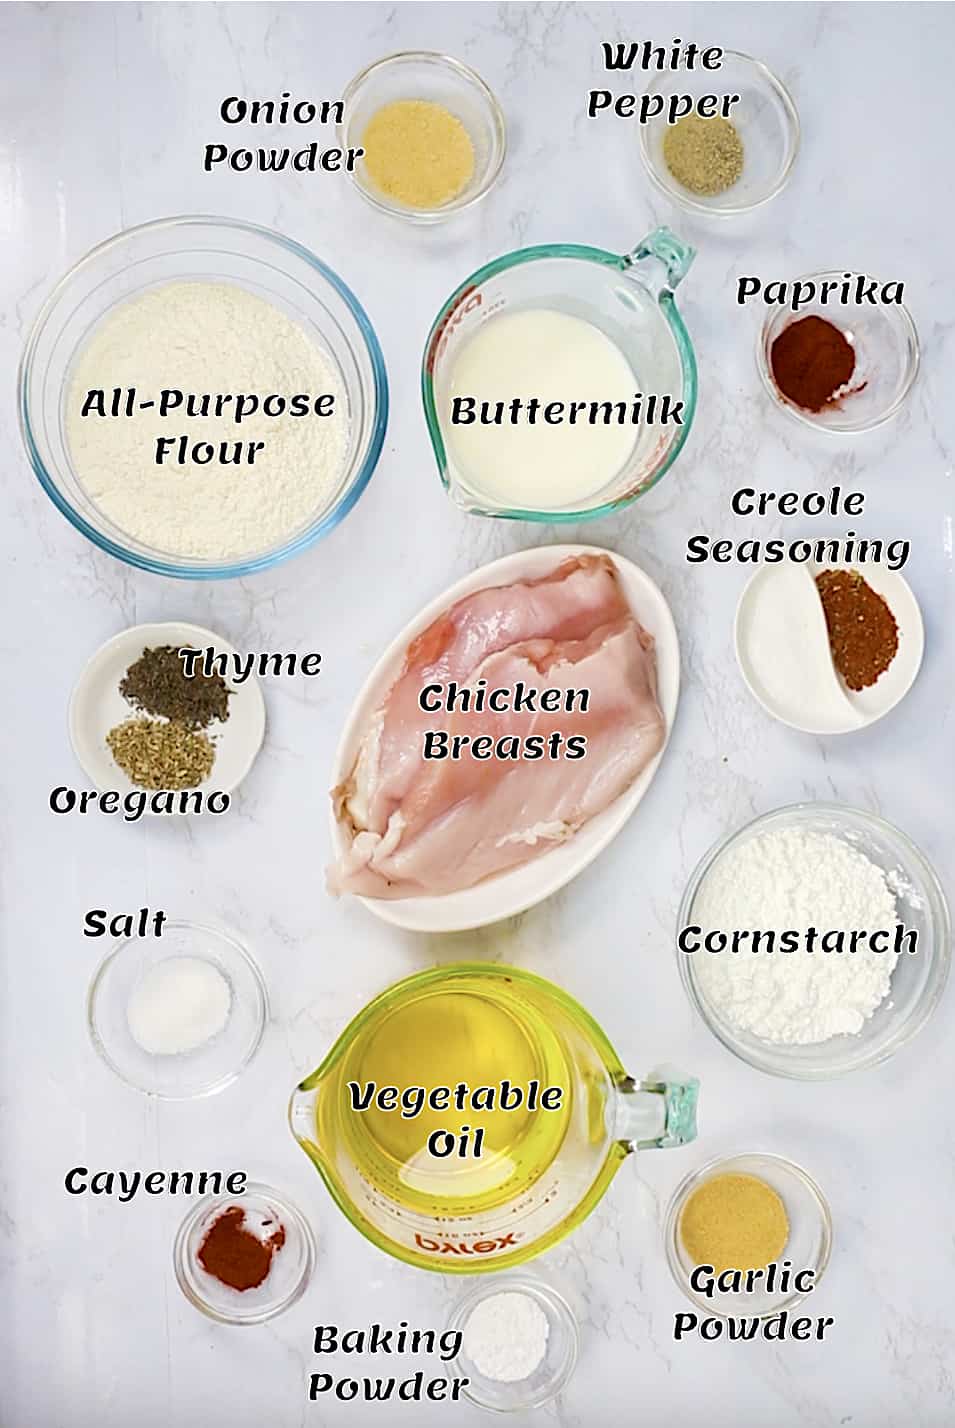 Recipe ingredients for the fried chicken in a sandwich.